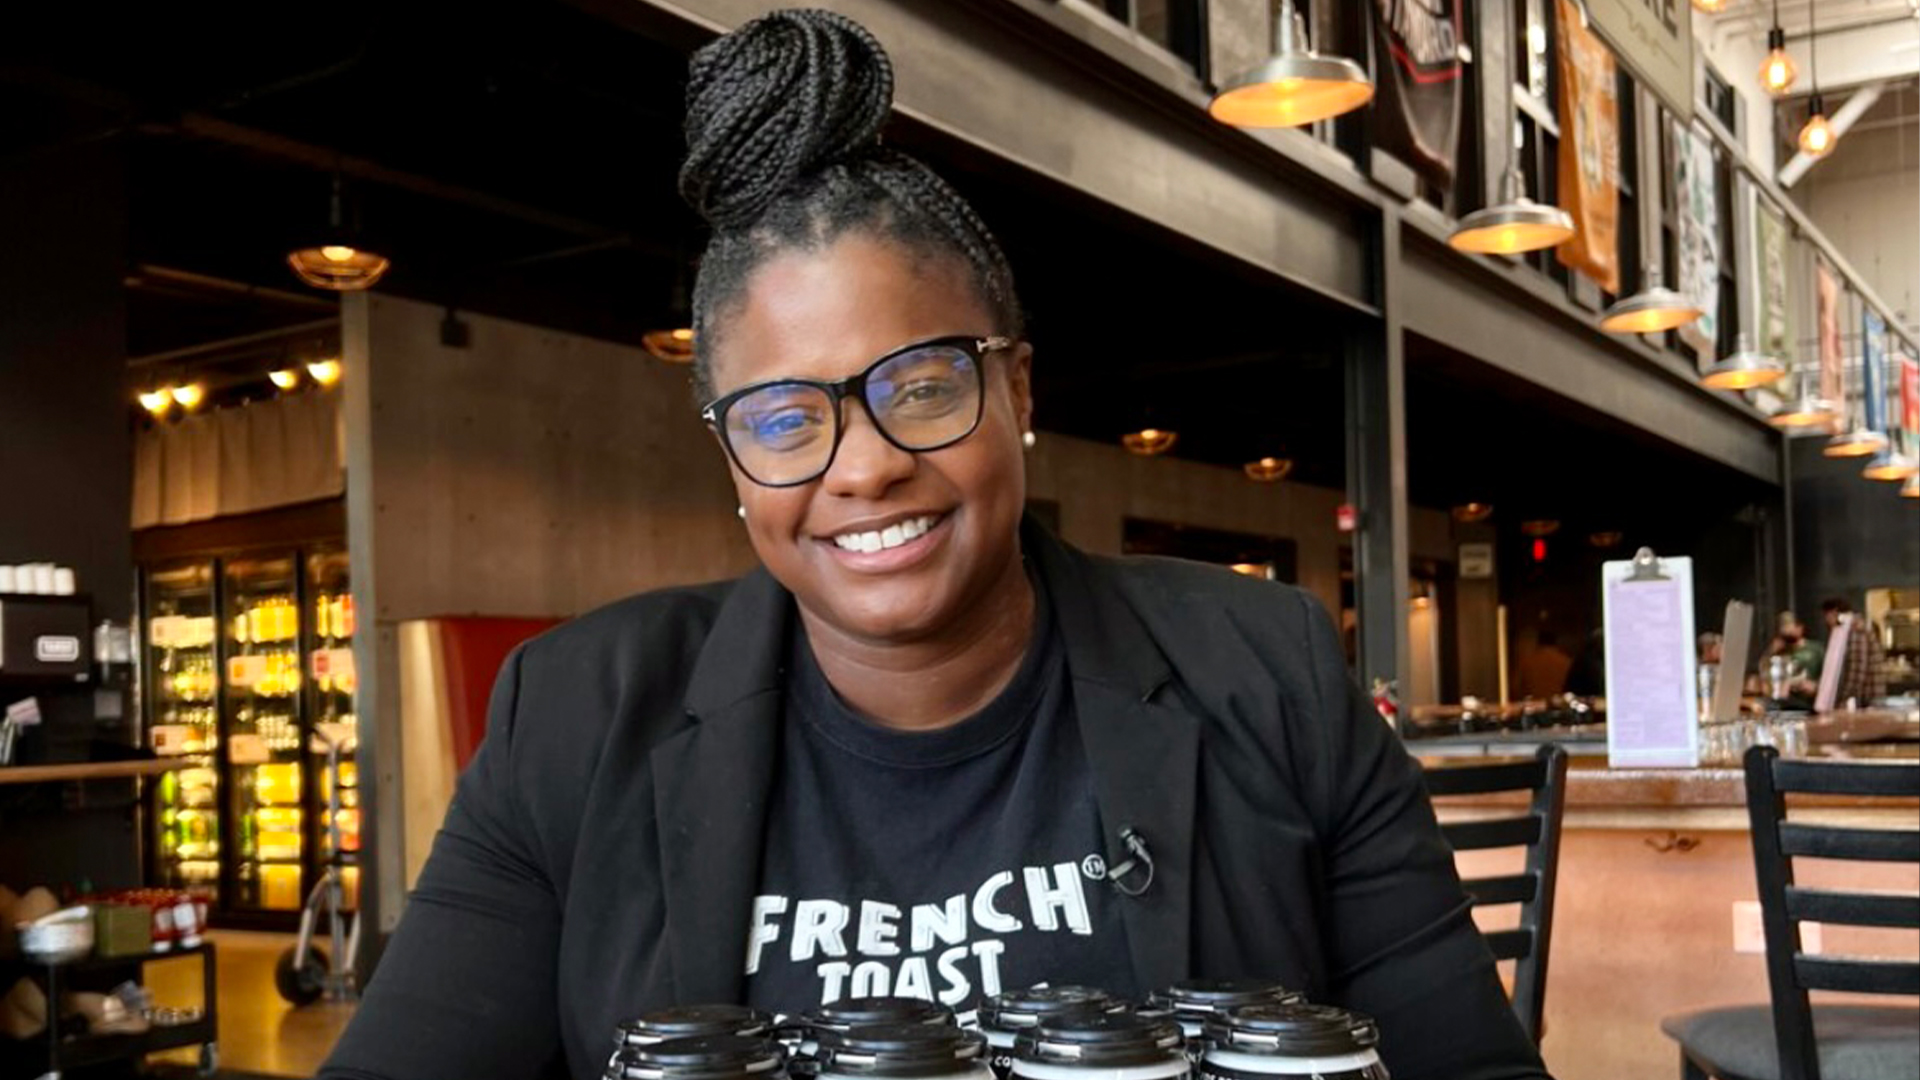 Charisse McGill Resigned From Her Director-Level Position To Start A Business That Is Helping Inner City Youth